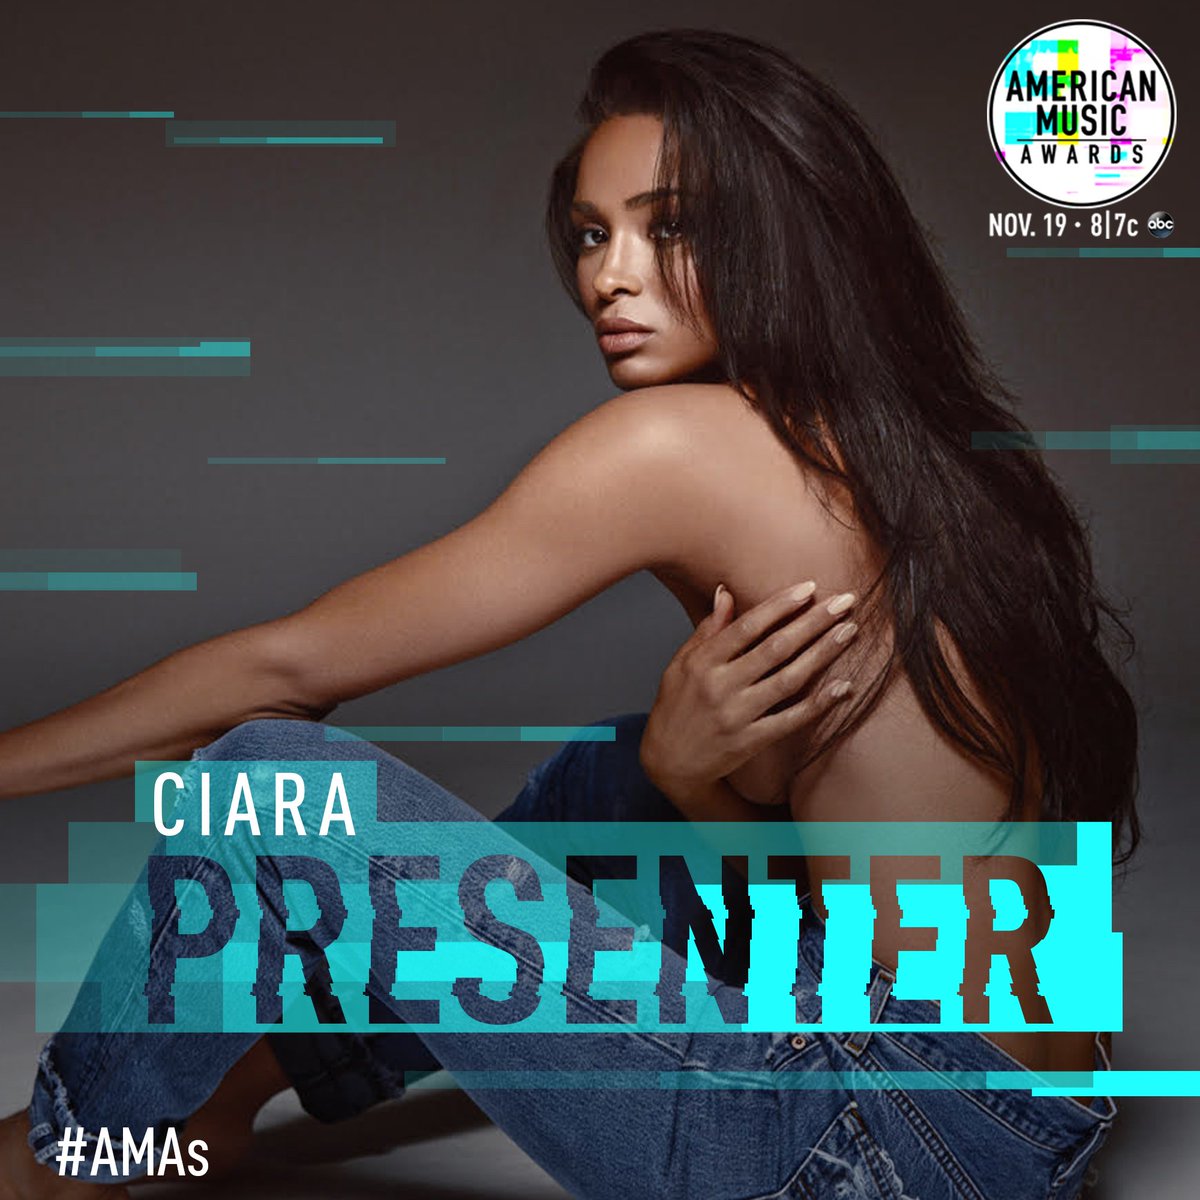 RT @AMAs: Oh hi, @Ciara! Can't wait to see you at the #AMAs this Sunday at 8/7c on ABC! ???? https://t.co/UqM8gG4WOH